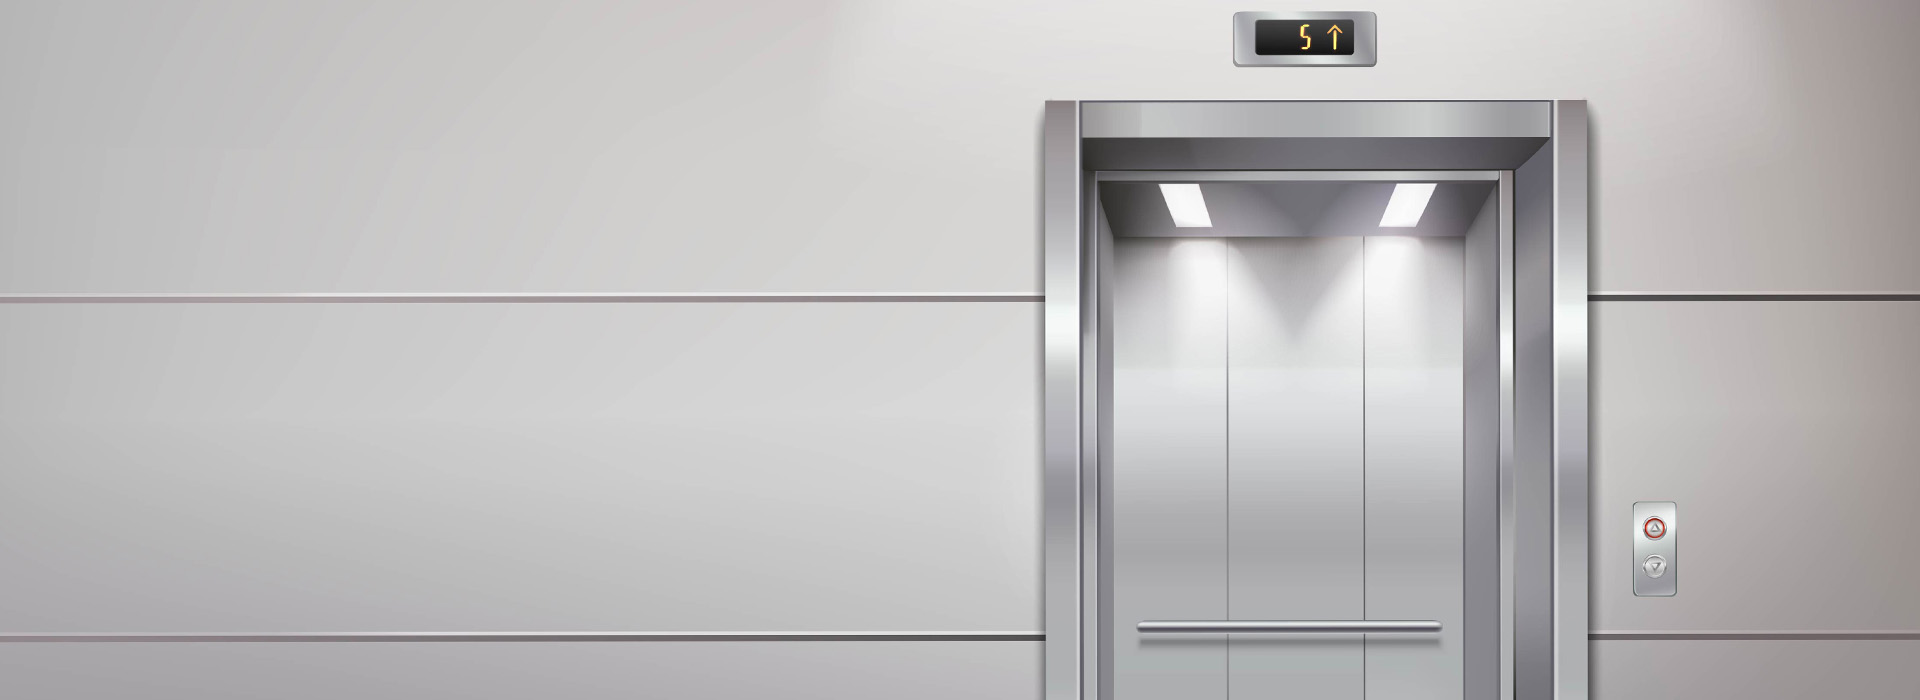 Elevator Accidents and How to Protect Yourself